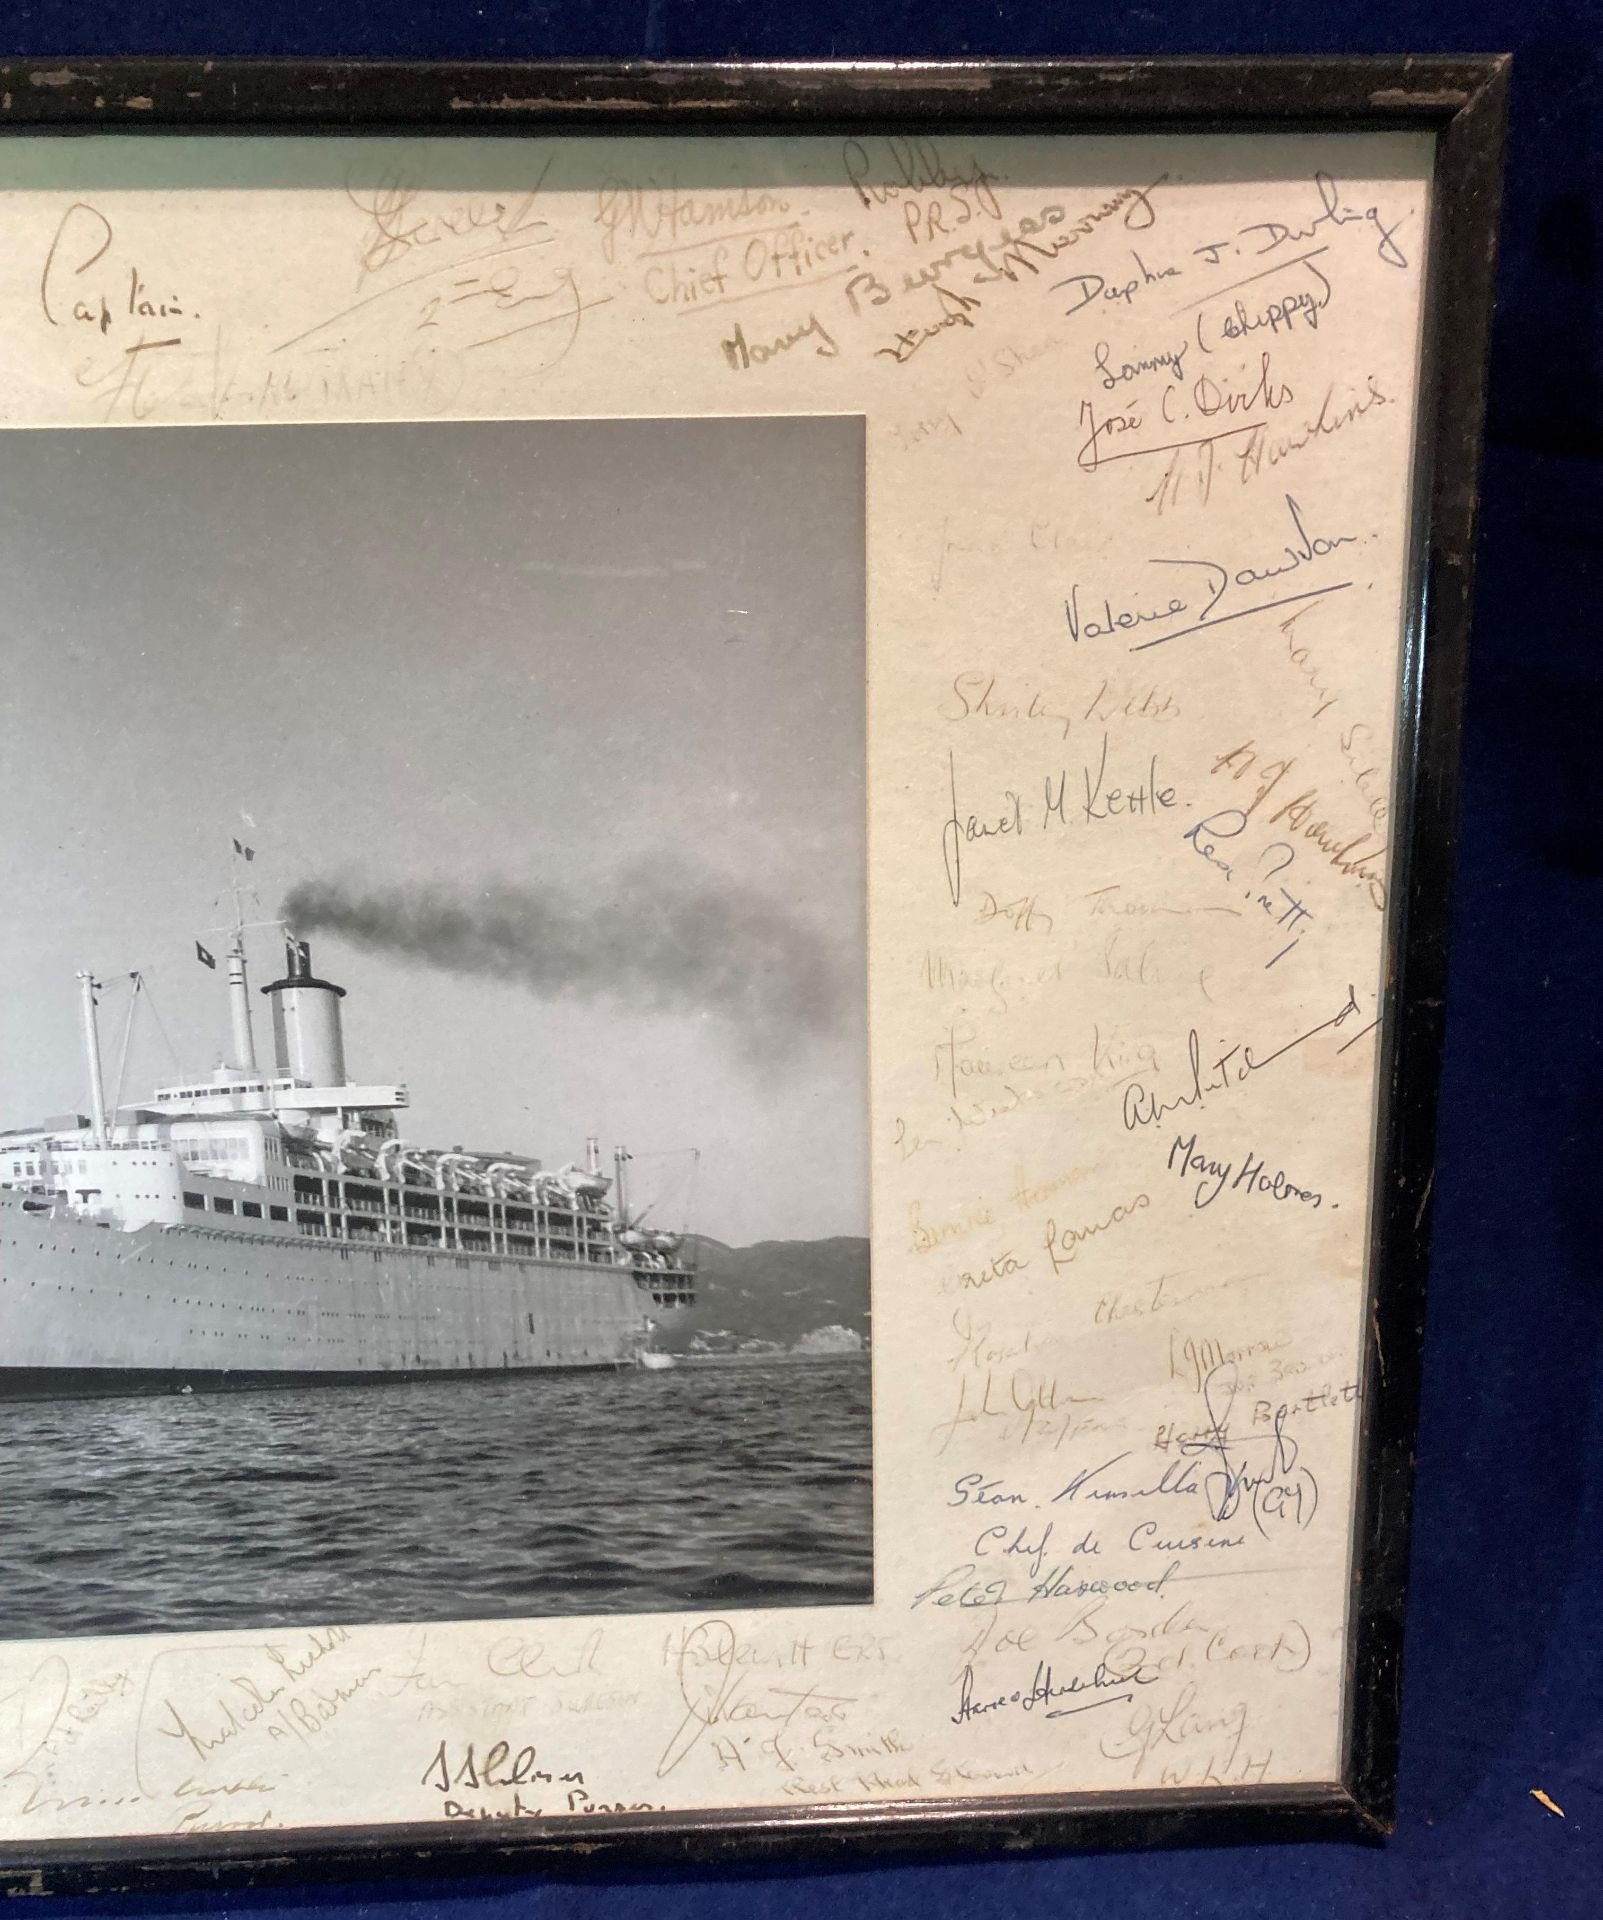 A framed photograph of the ship Oronsay with crew members signatures to the margin (Saleroom - Image 4 of 4